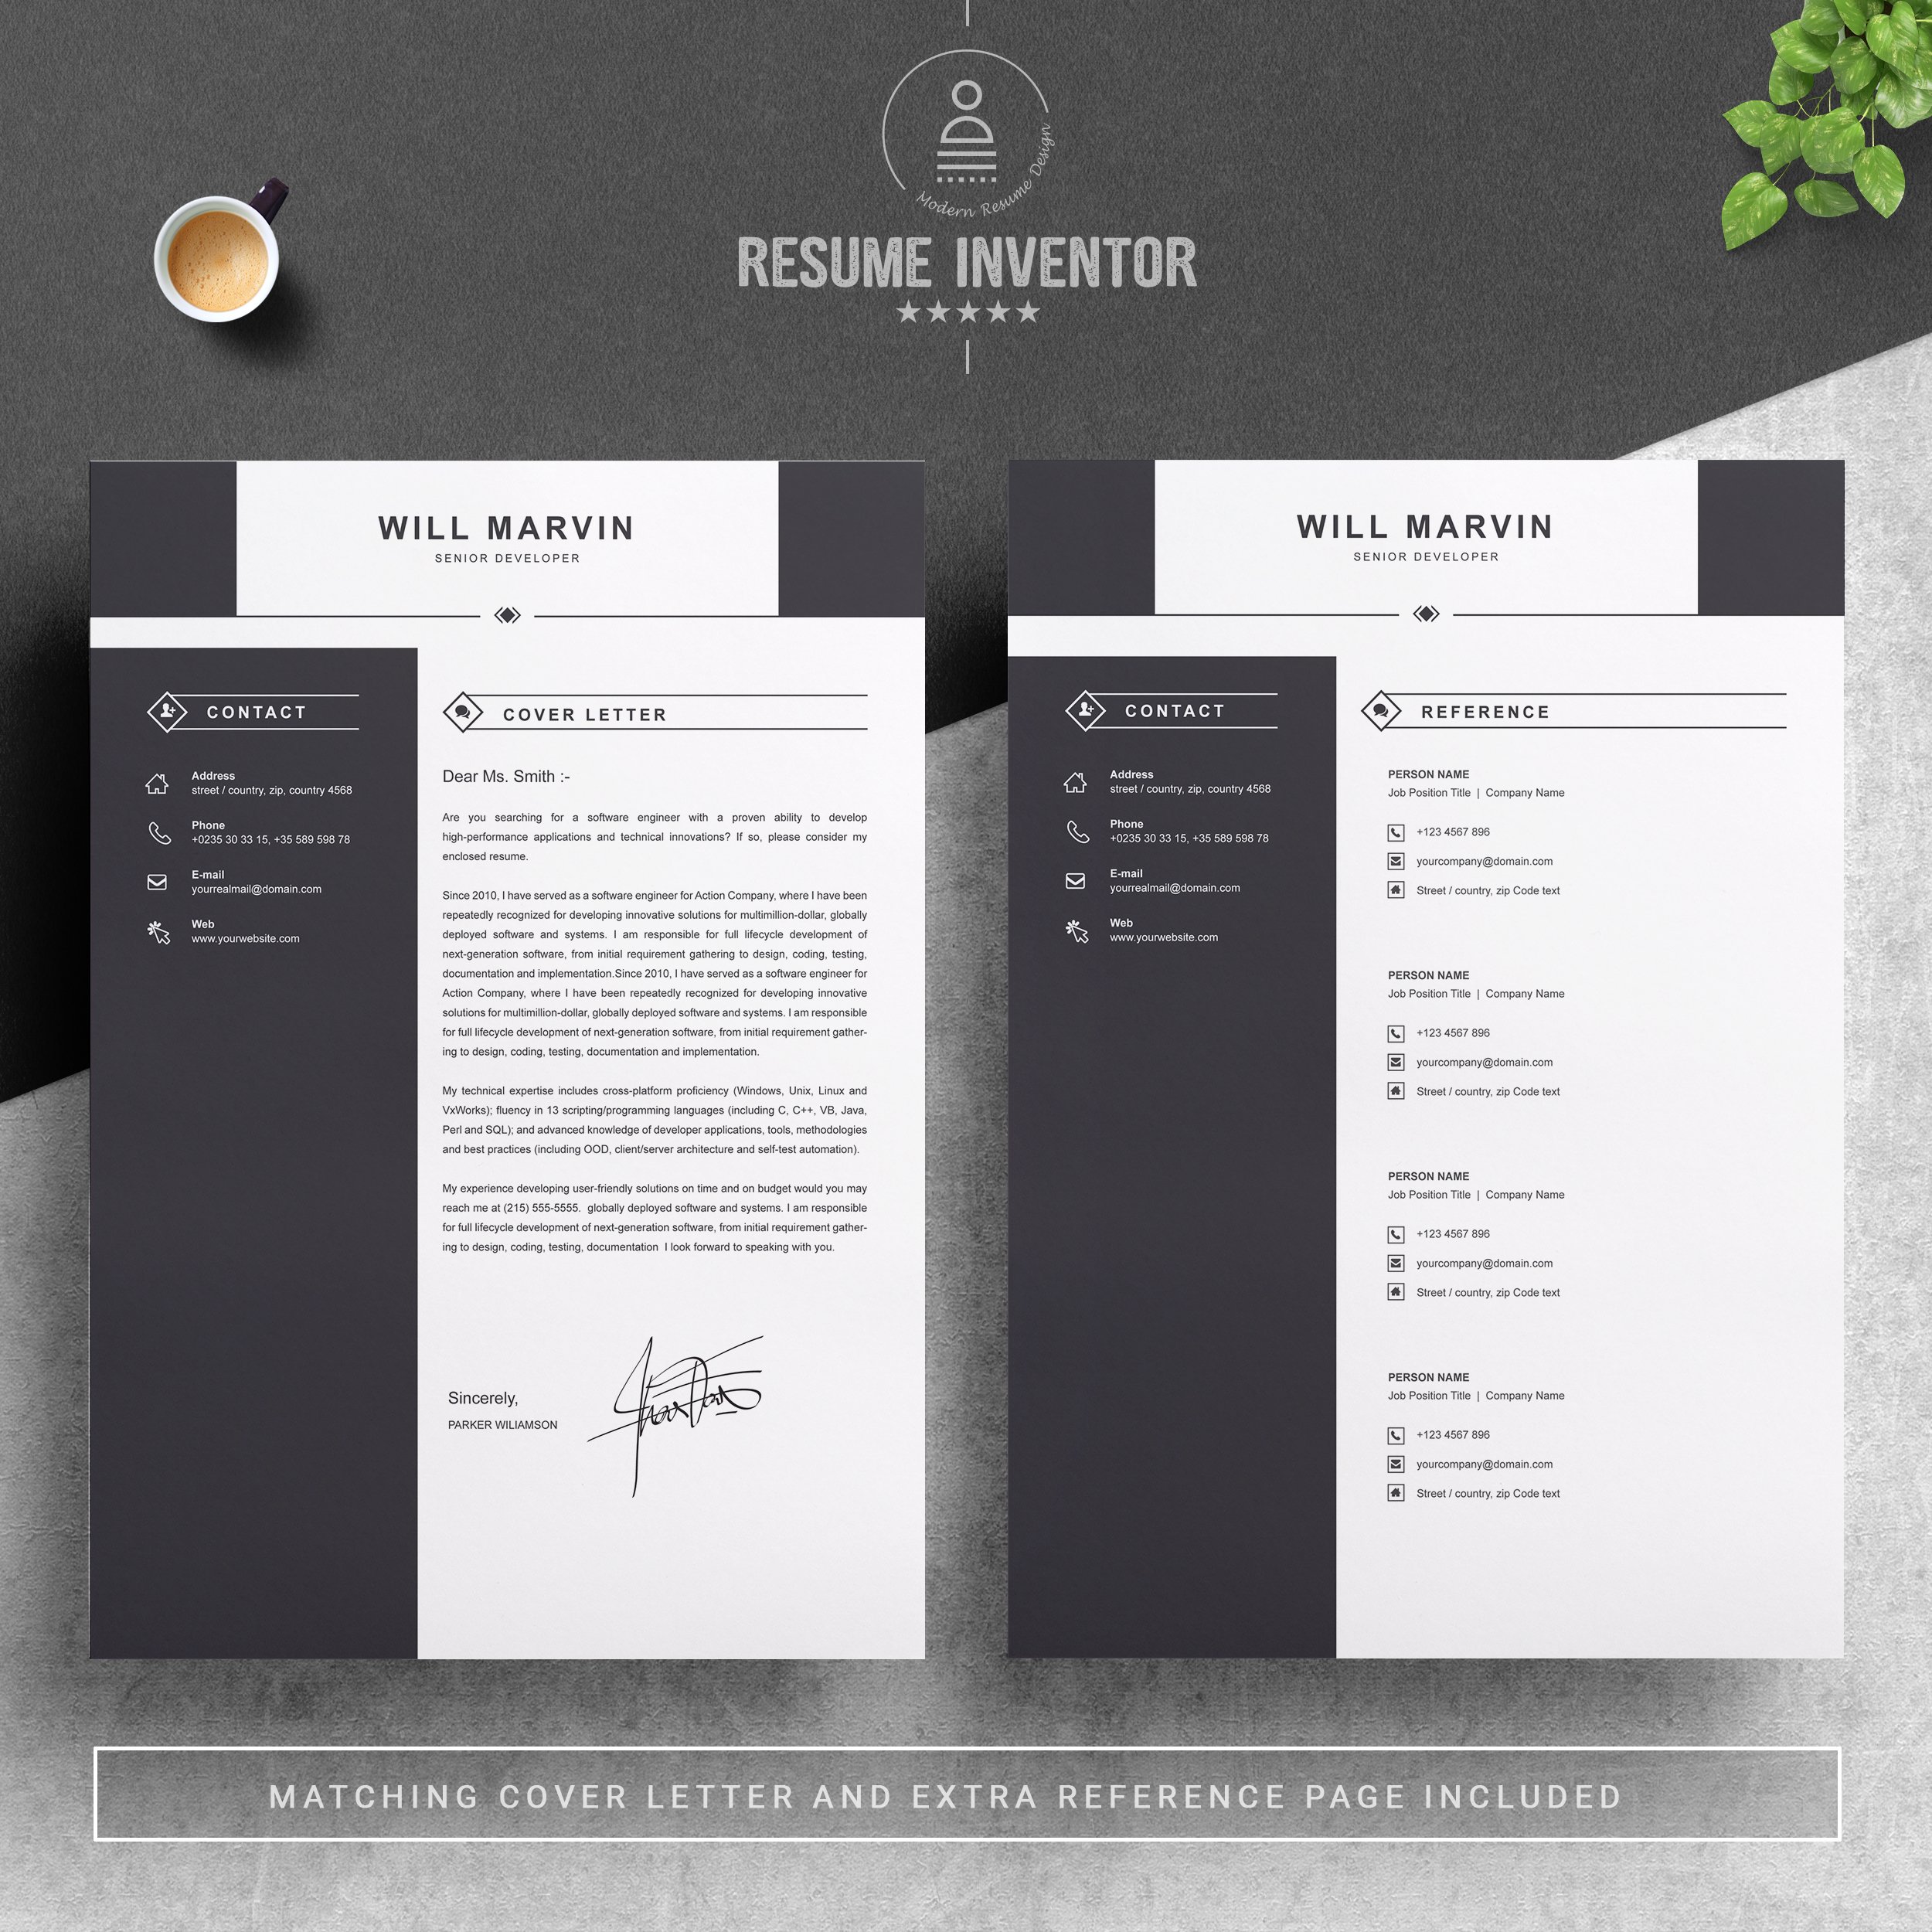 03 2 pages free resume design template 817